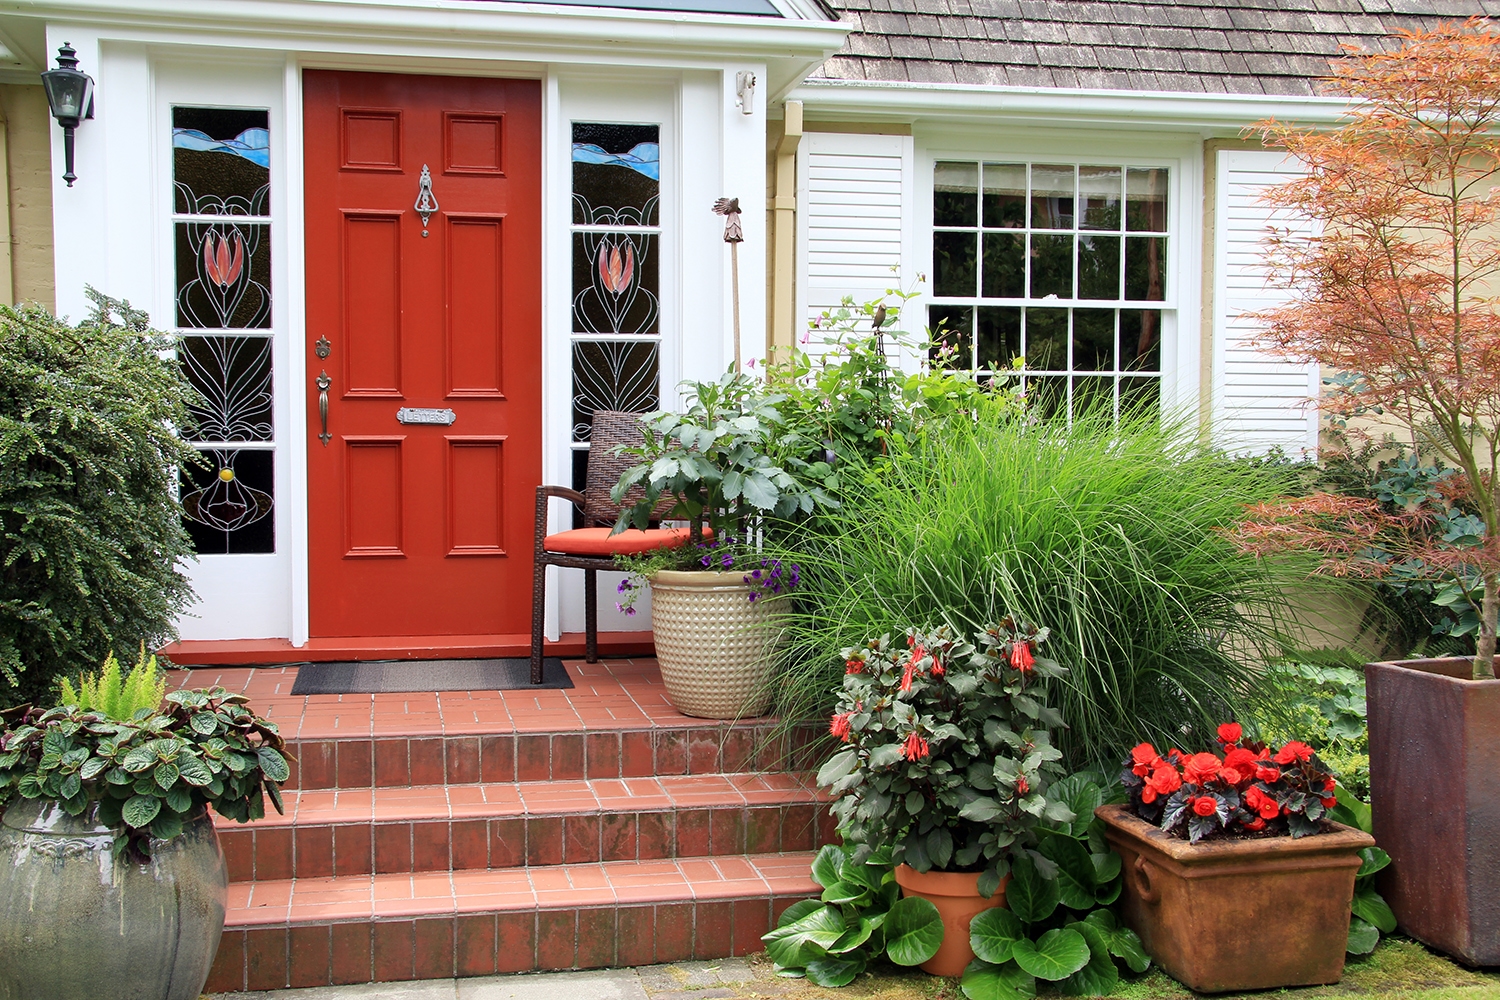 Adding Colorful Plans to Improve Curb Appeal